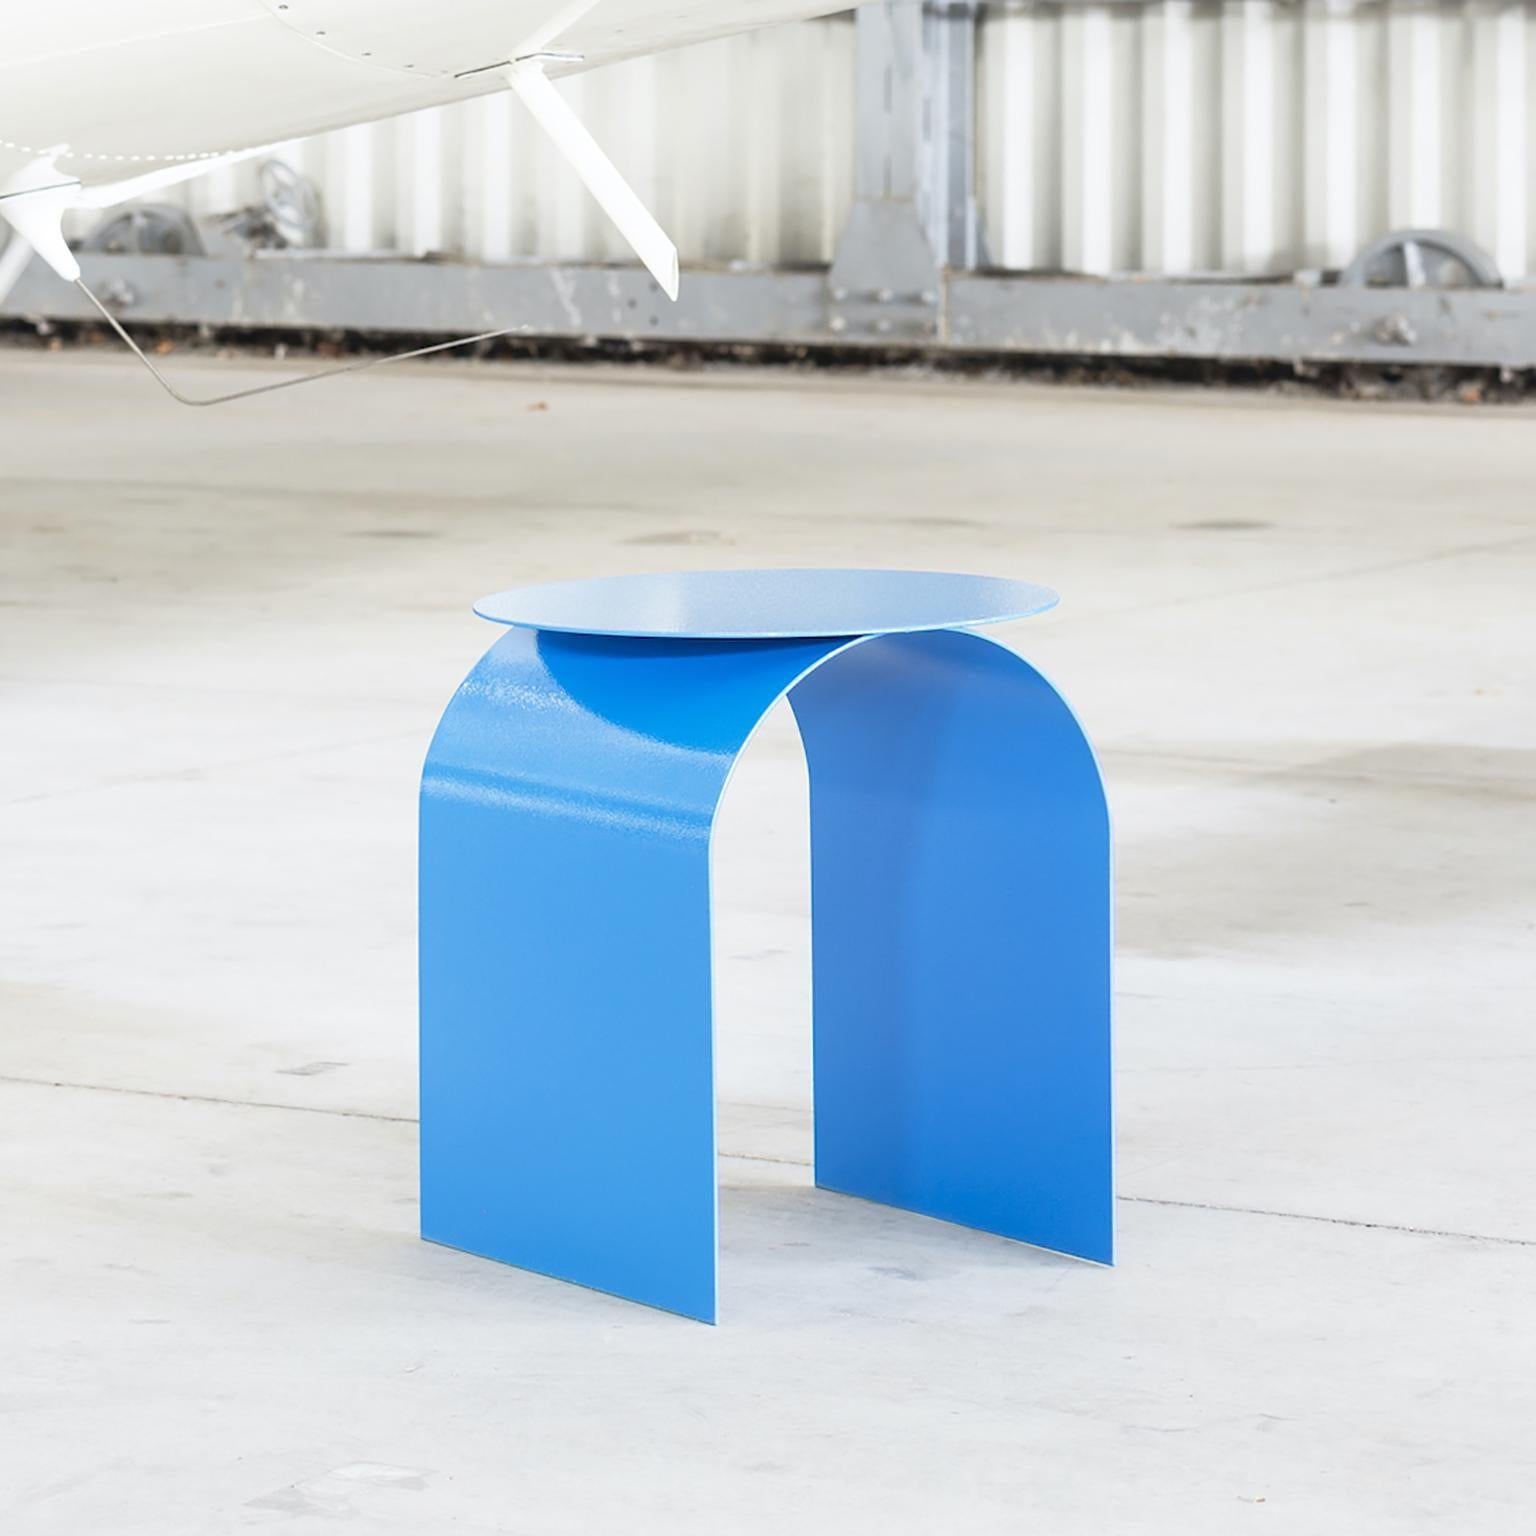 The neoclassical essentiality of the stool is inspired by the iconic architectures of Andrea Palladio. Crafted in air-thin metal and finished in bright colours, the Palladium side table is defined by the play of light and shadows on its surface.

A